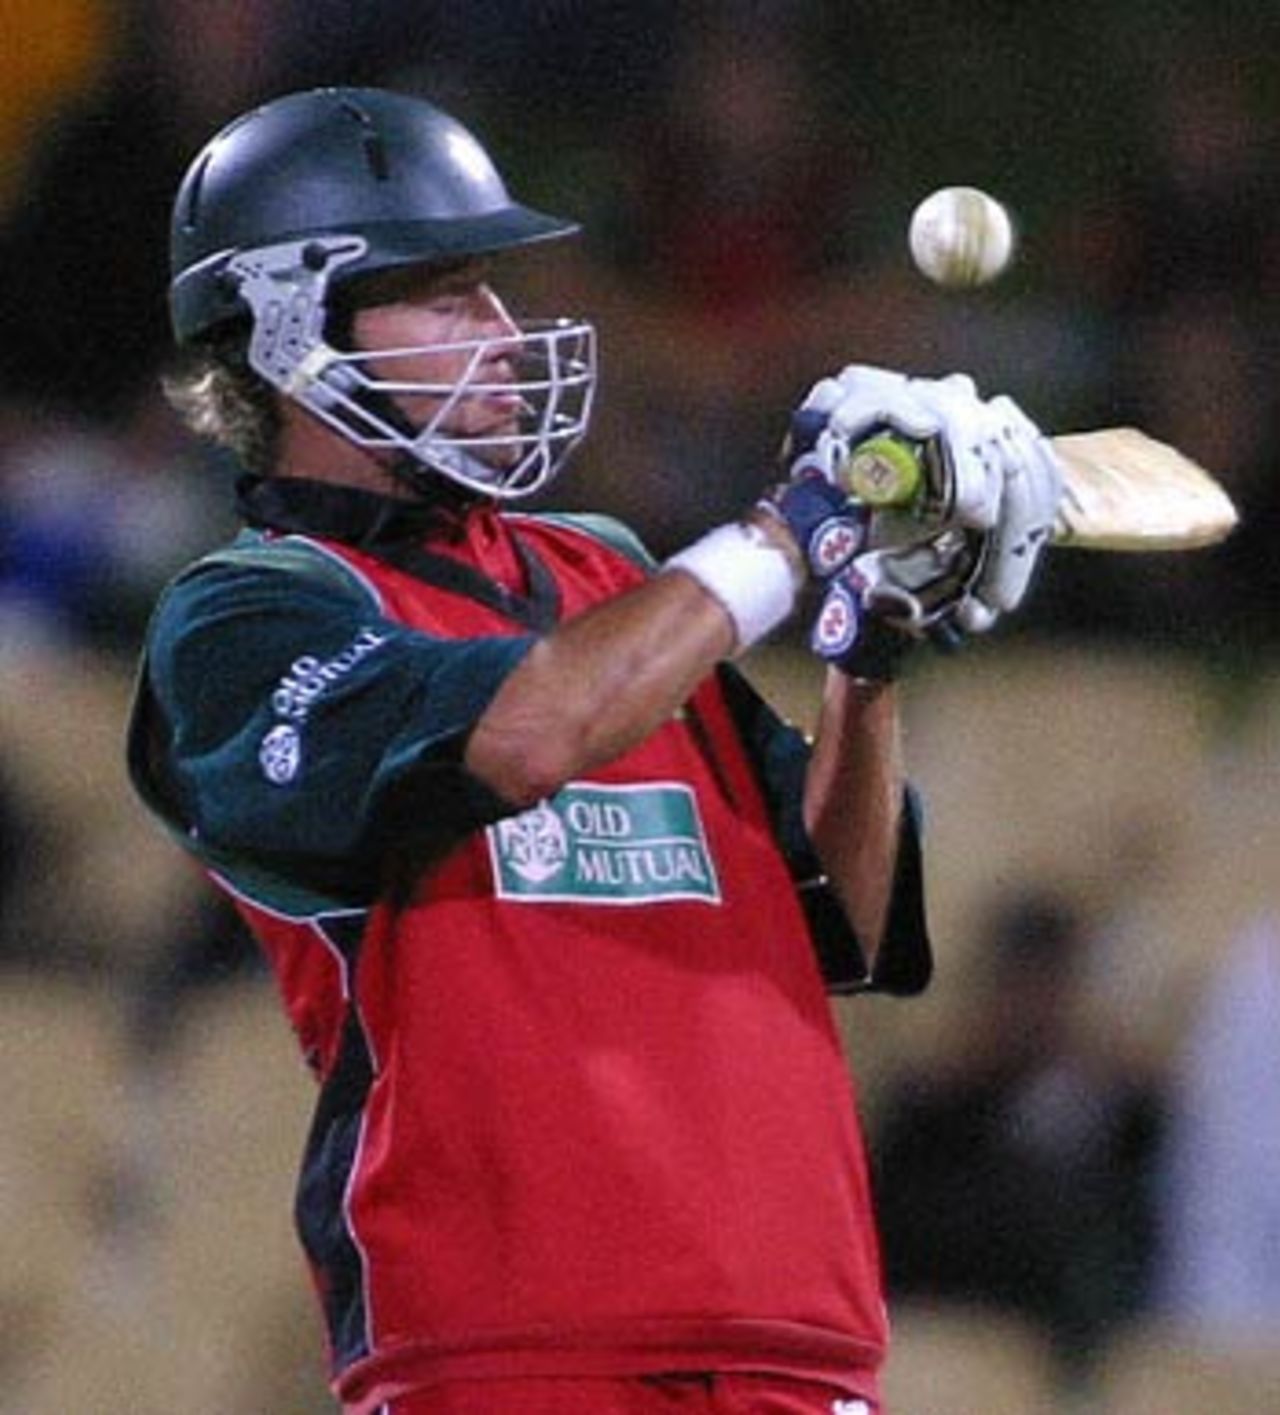 Sean Ervine could innovate when Zimbabwe needed to up the rate of scoring, India v Zimbabwe, VB Series, 8th ODI, Adelaide, January 24, 2004